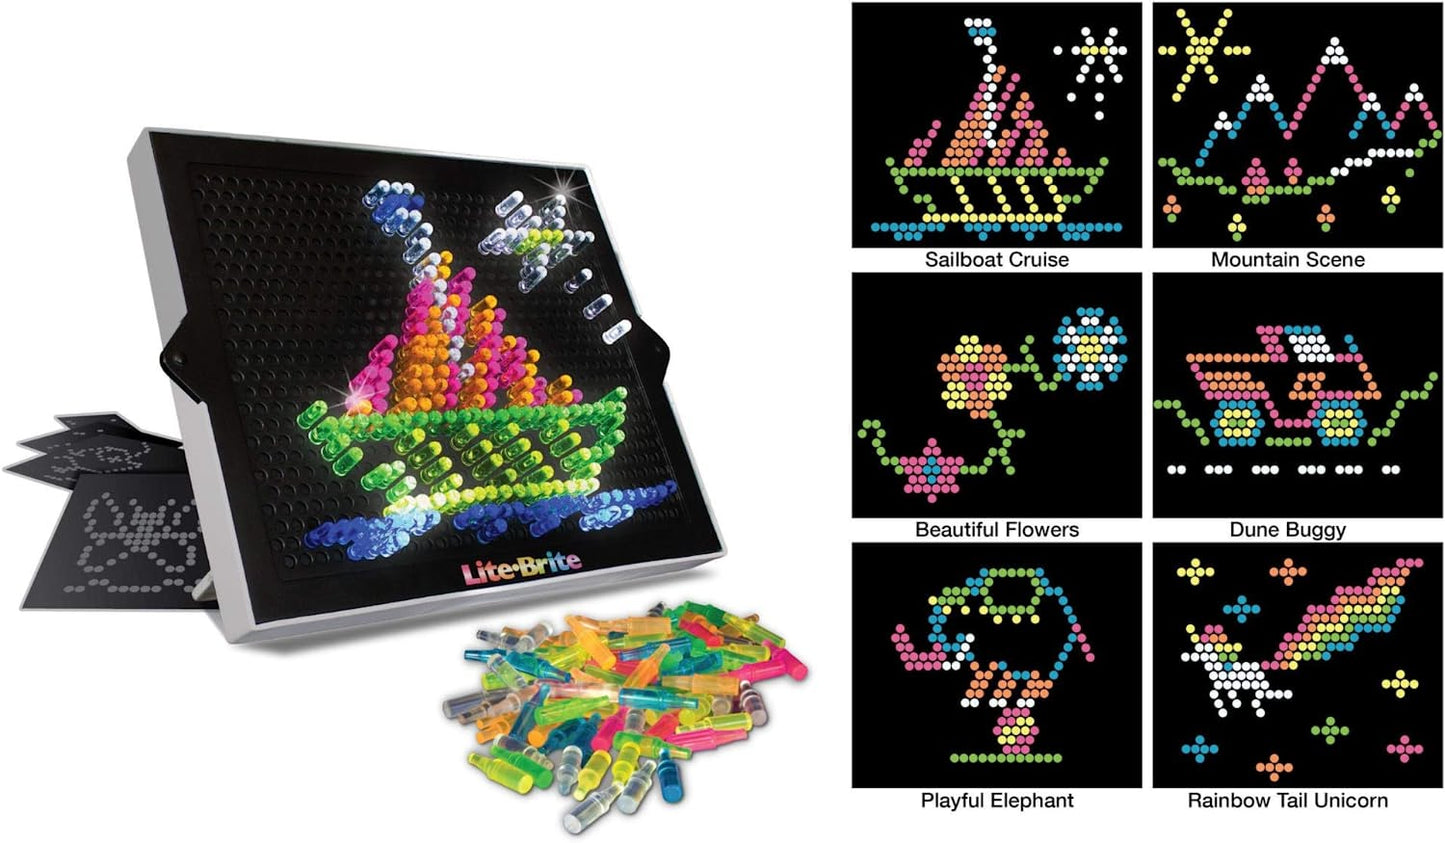 Lite-Brite Ultimate Classic Retro and Vintage Toy, Gift for Girls and Boys, Ages 4+